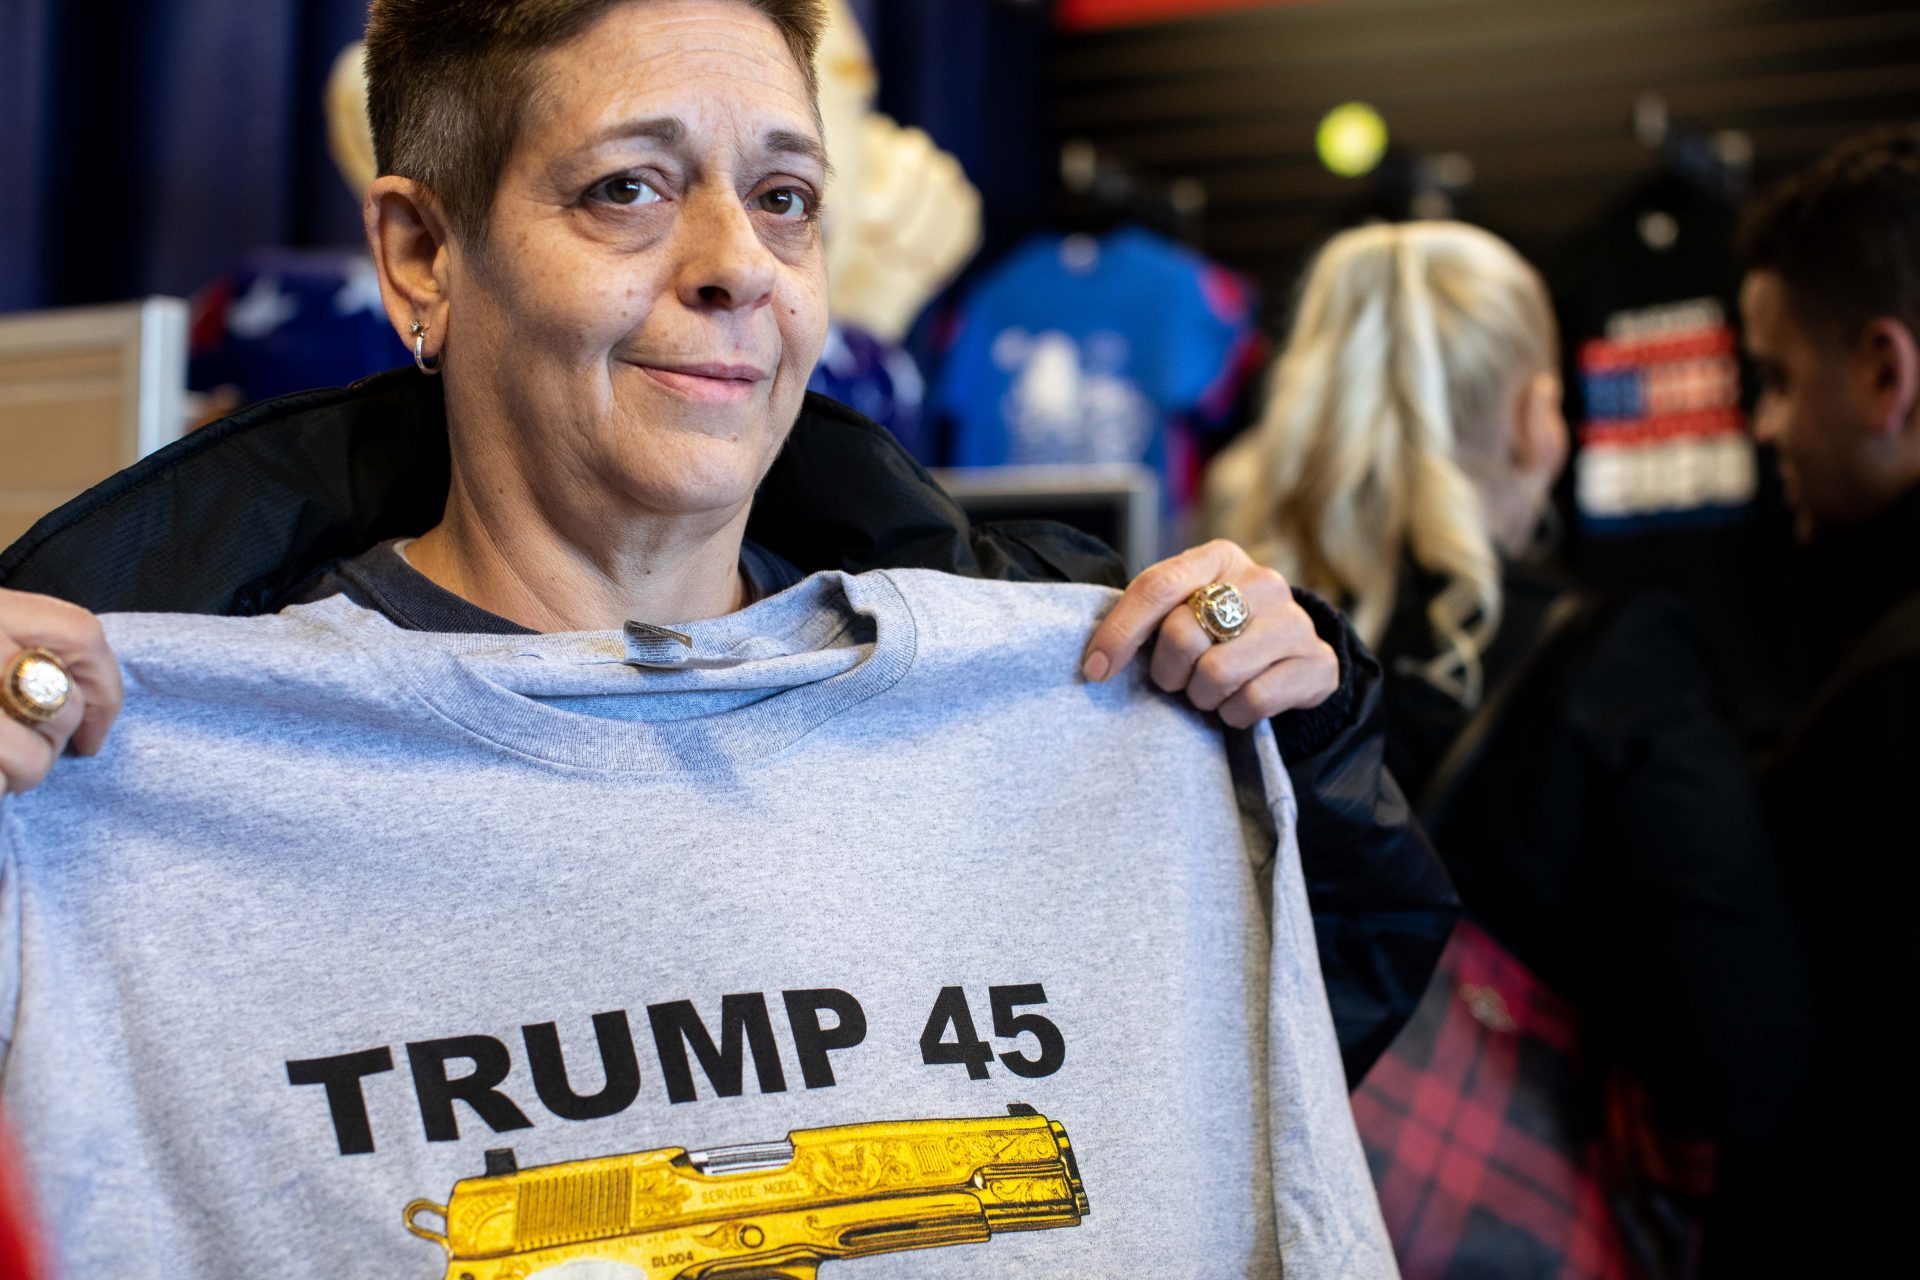 Michele D’Anjolell shops at the Trump Store on Saturday. She traveled from Upper Darby to the store and described feeling alienated as a member of the LGBTQ community who supports Trump.